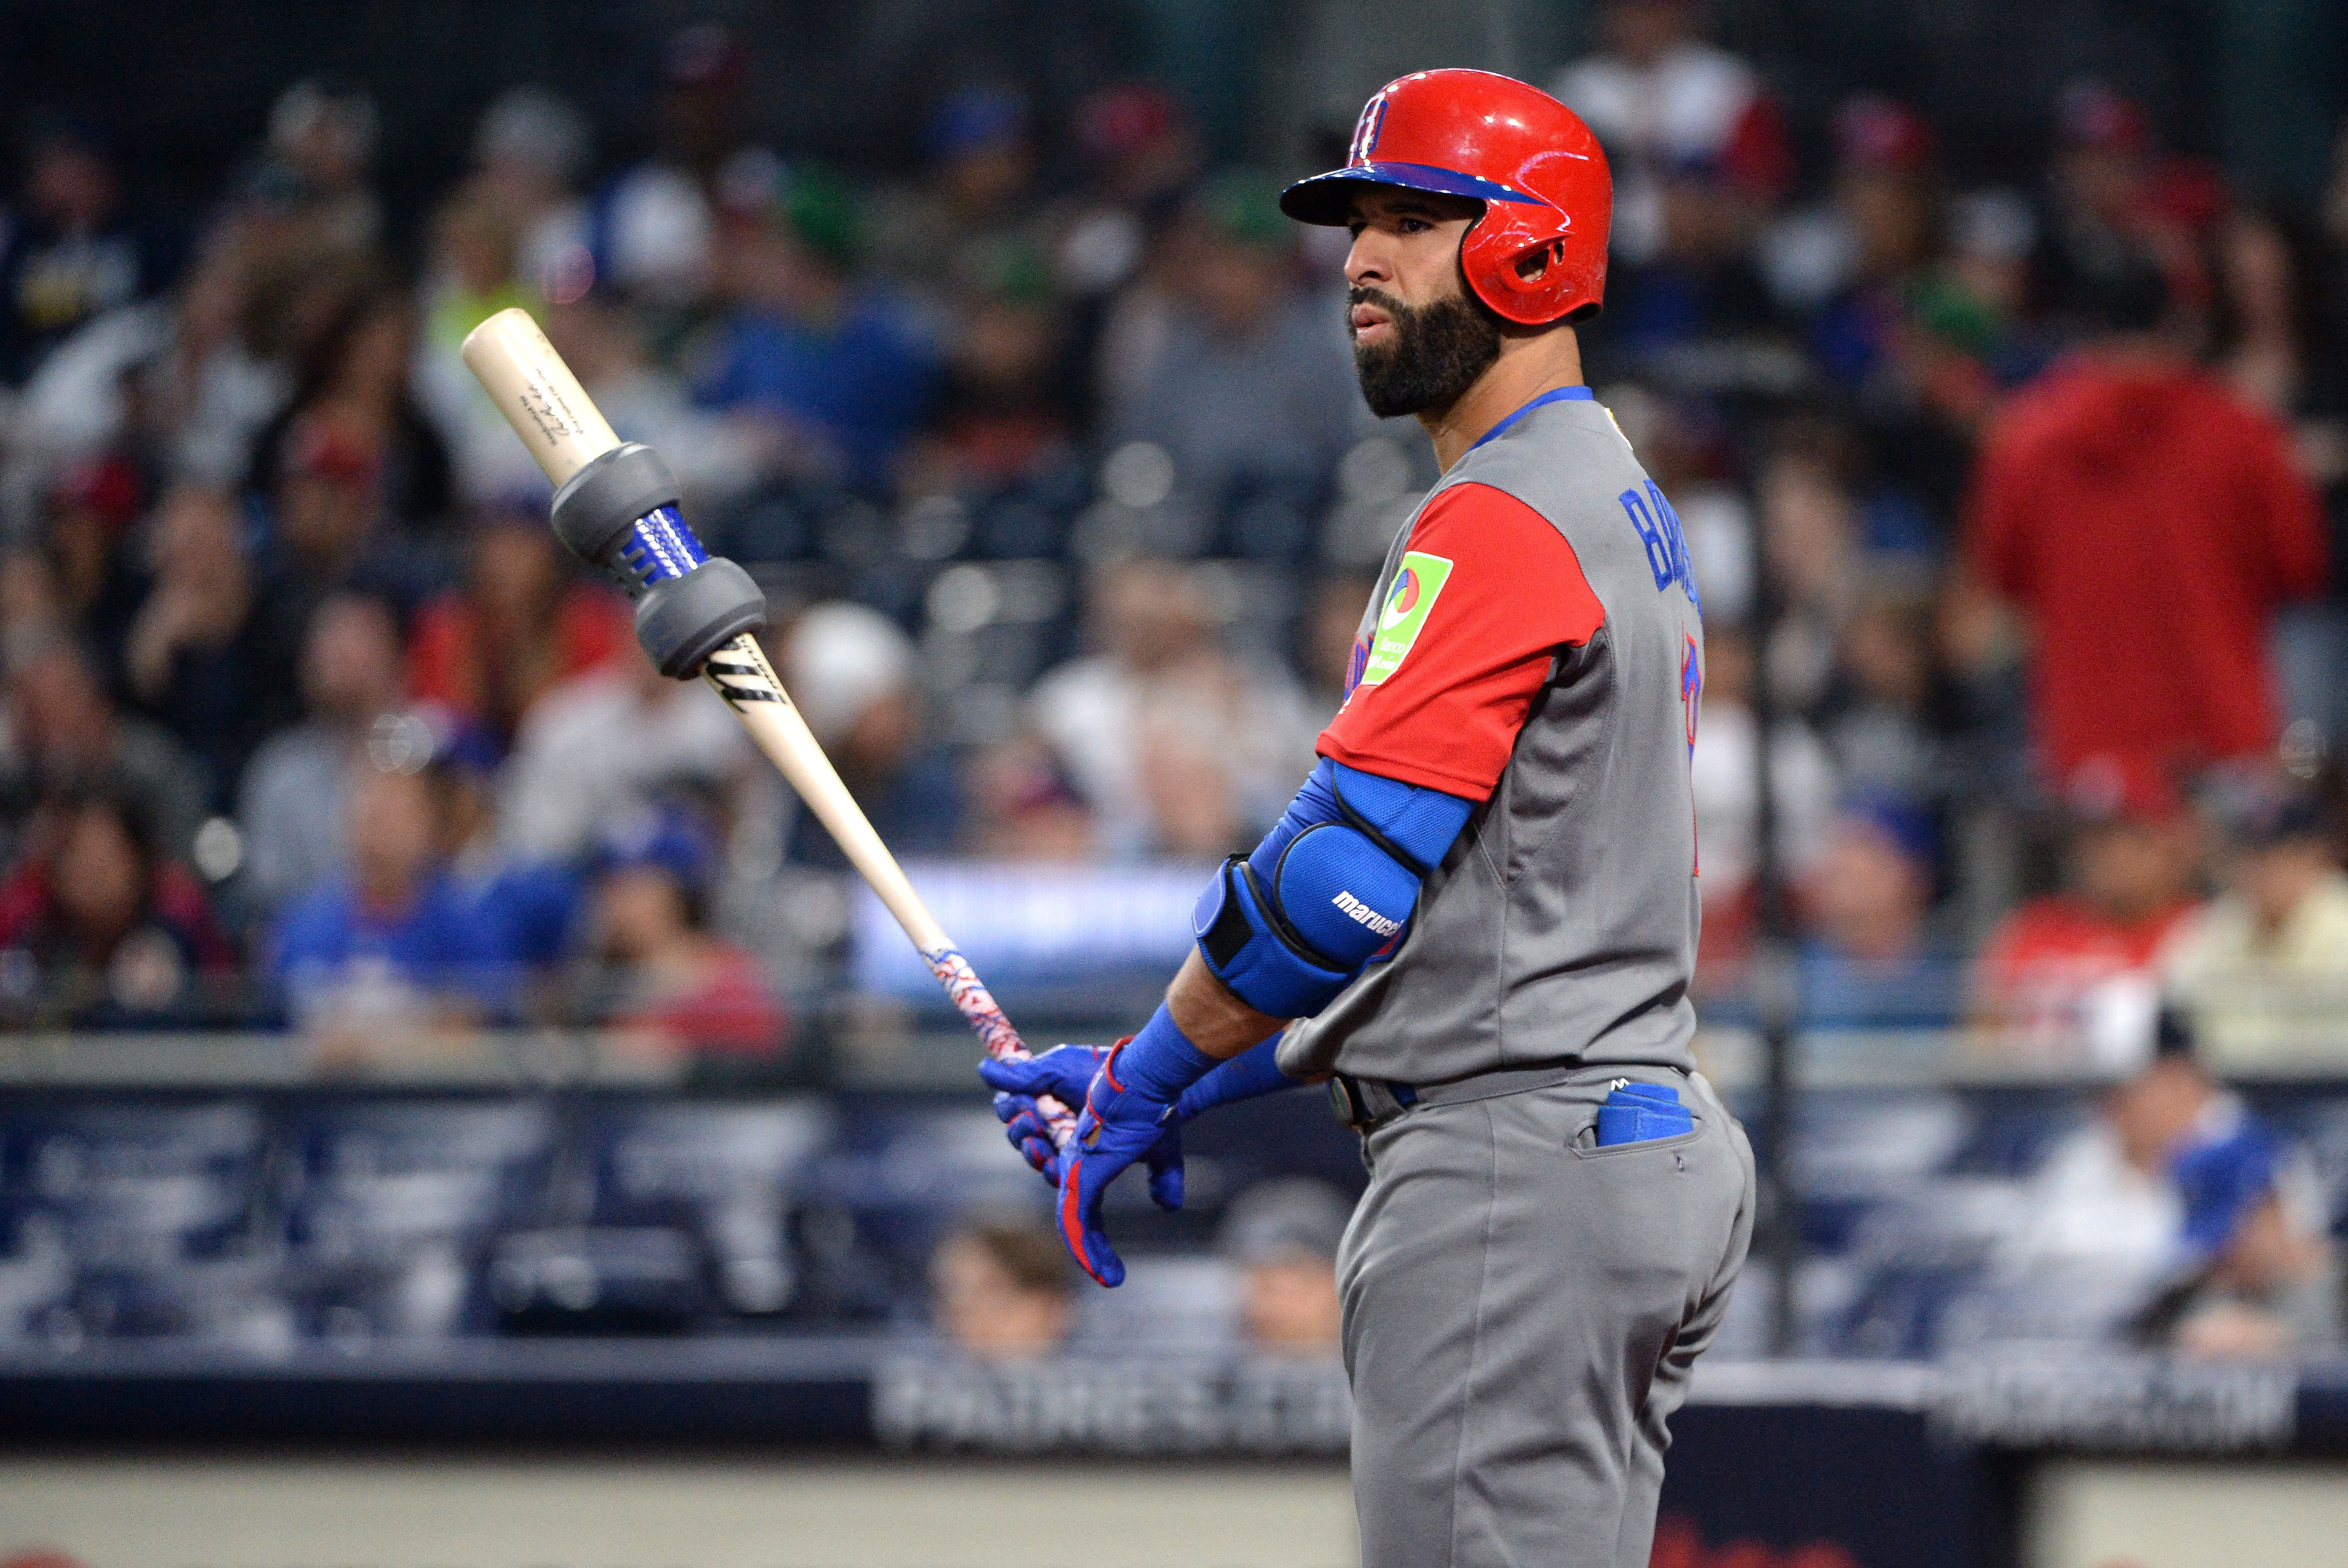 Jose Bautista, ex-slugger, attempting MLB comeback as two-way player